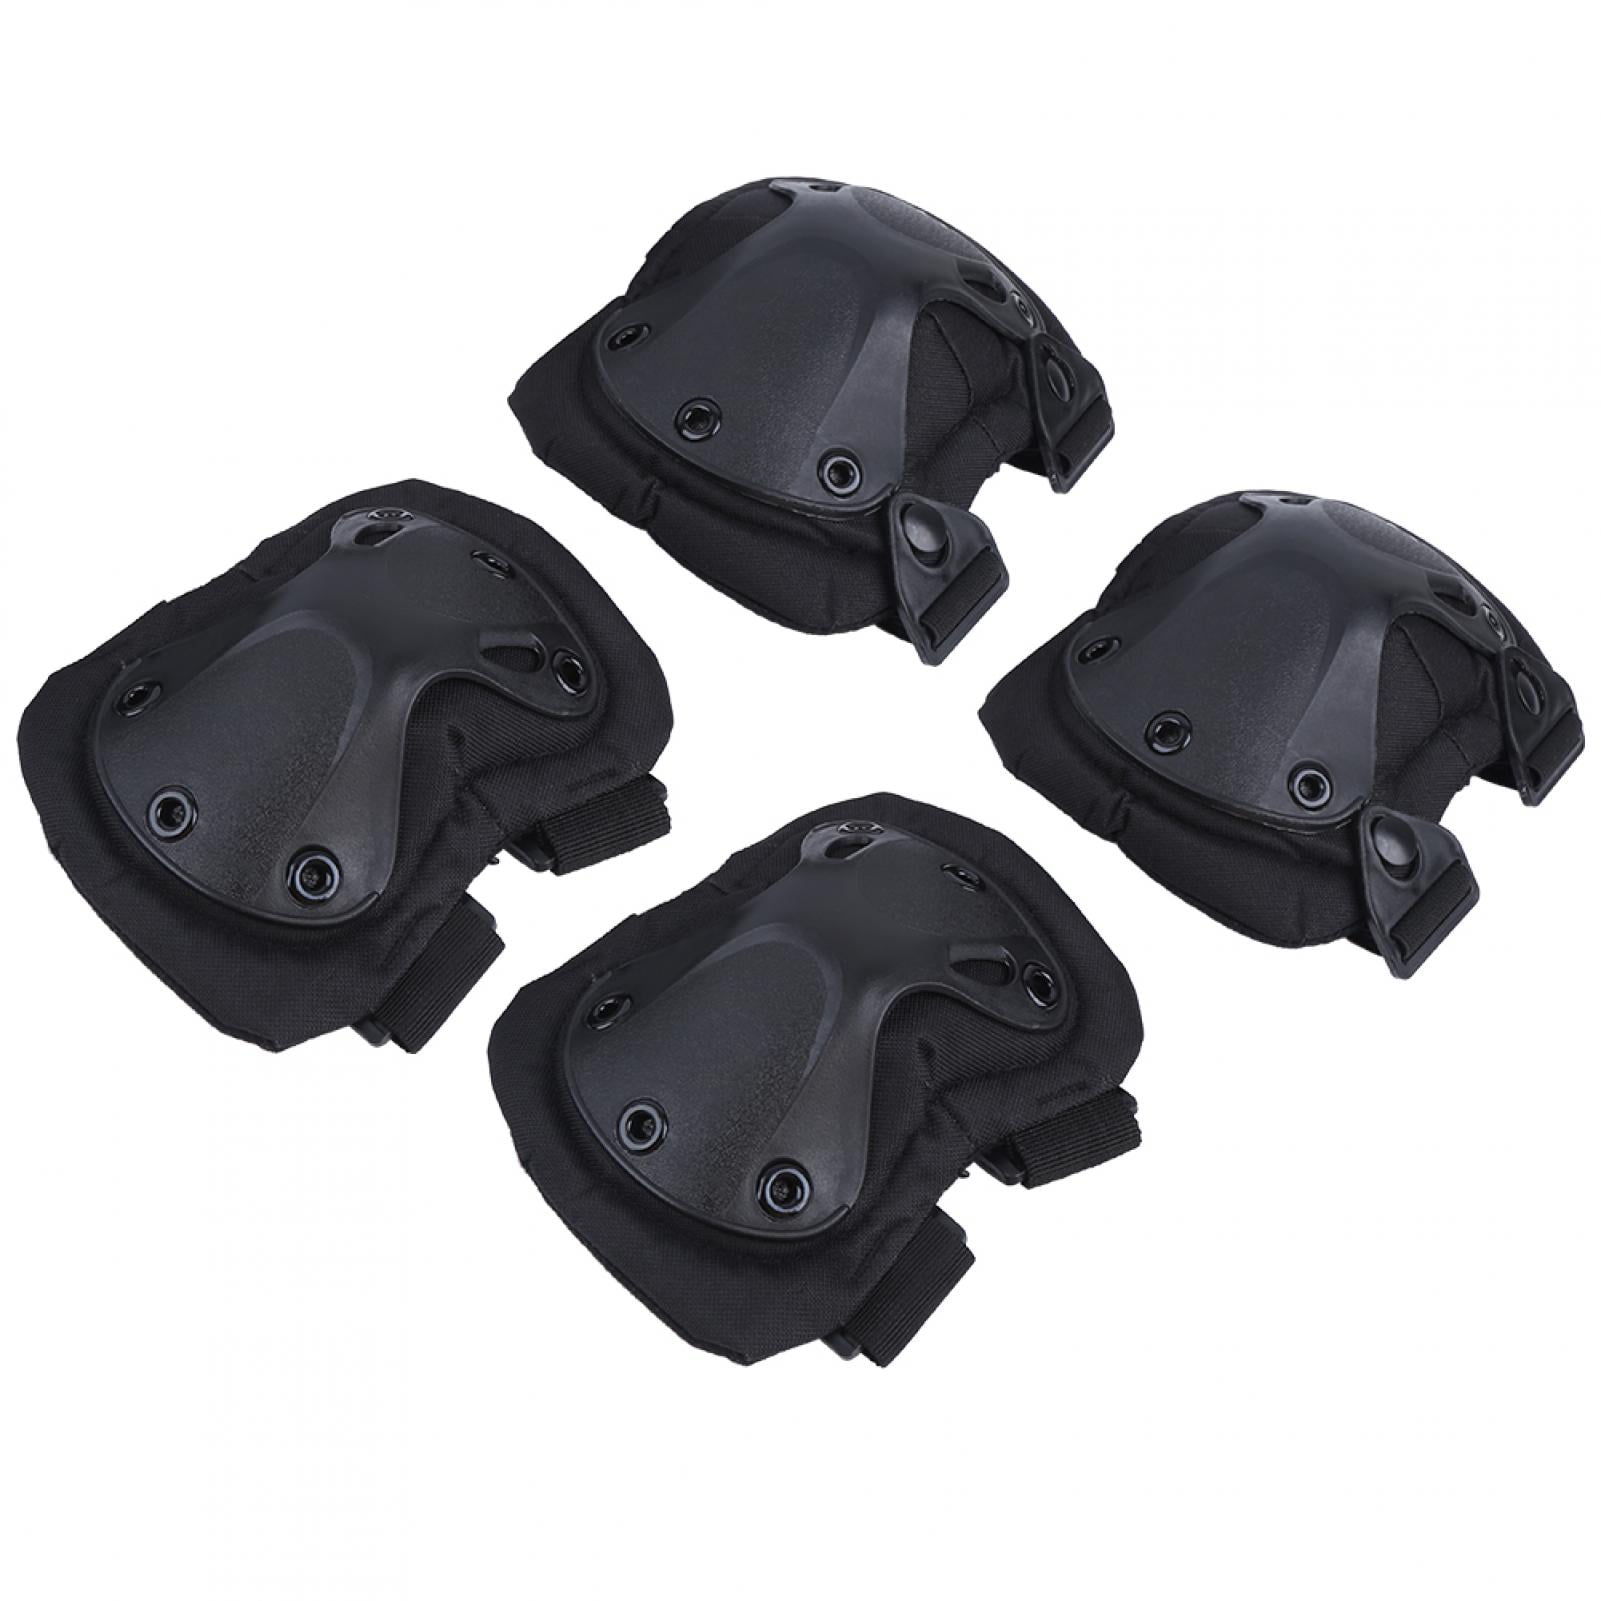 Black Outdoor Military Knee and Elbow Protective Pads Cycling Knee Pad 